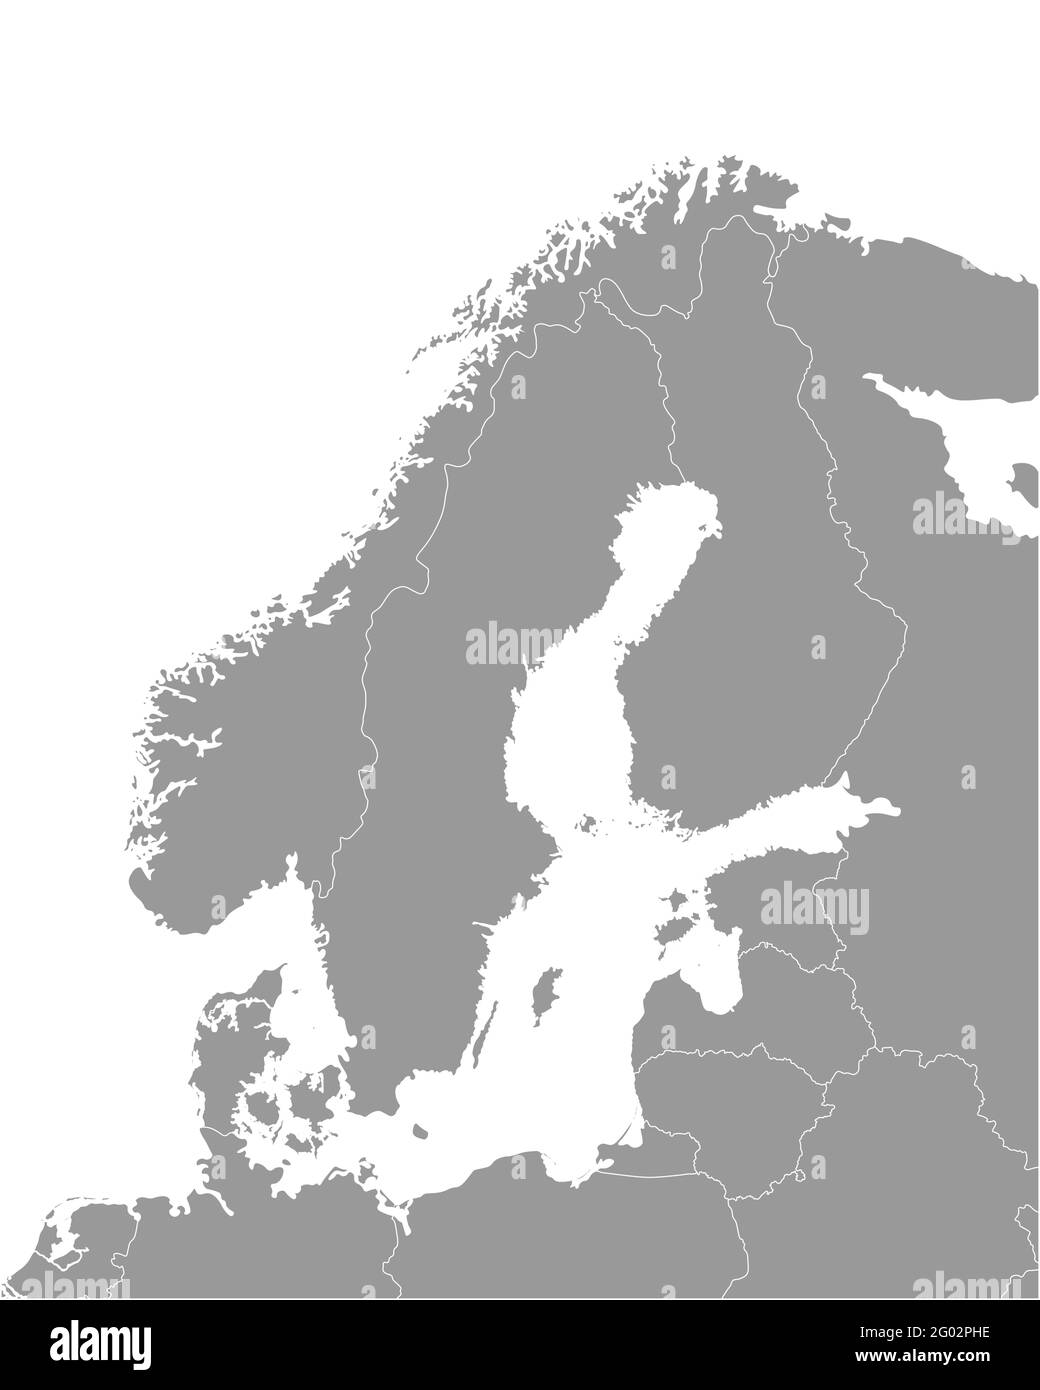 Vector isolated illustration of simplified political map of some scandinavian countries (Sweden, Finland, Norway, Denmark) and nearest areas. Borders Stock Vector